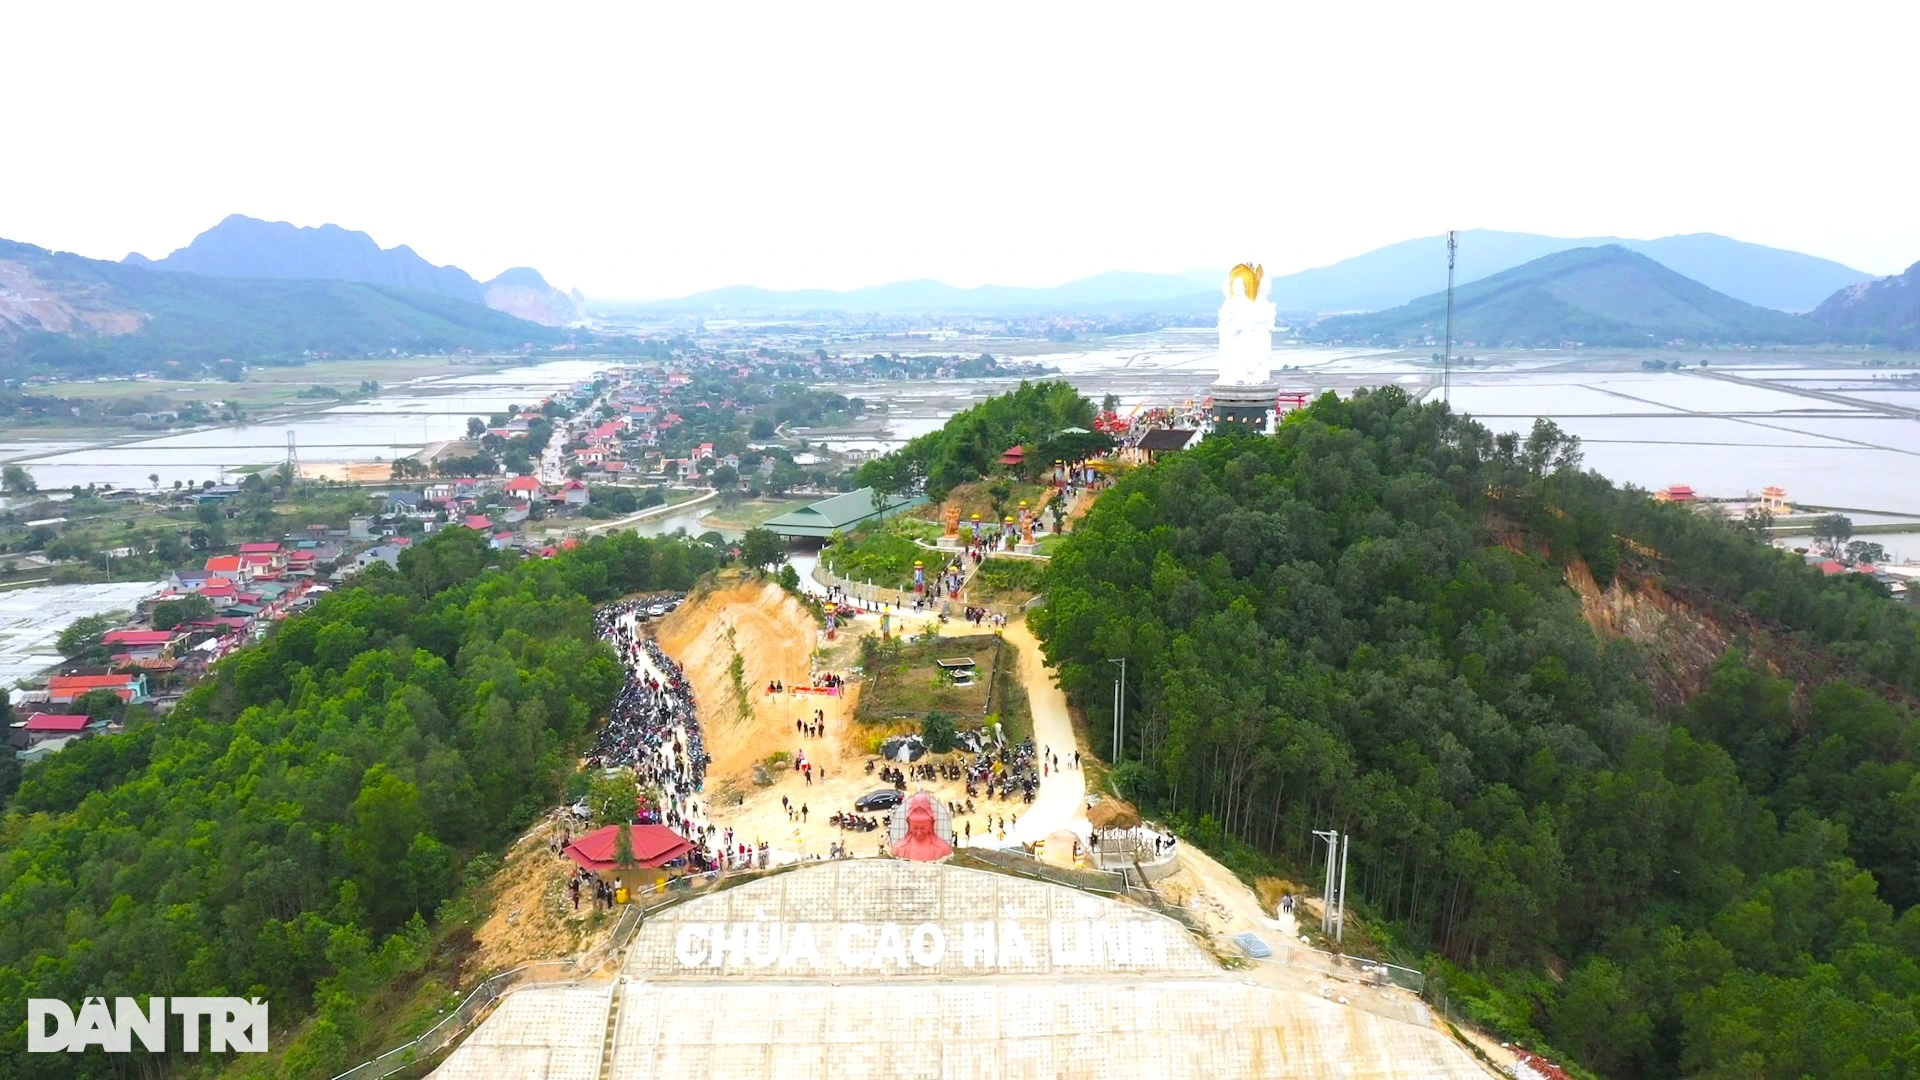 Glass bridge supported by a giant hand, first appeared in Thanh Hoa - 2